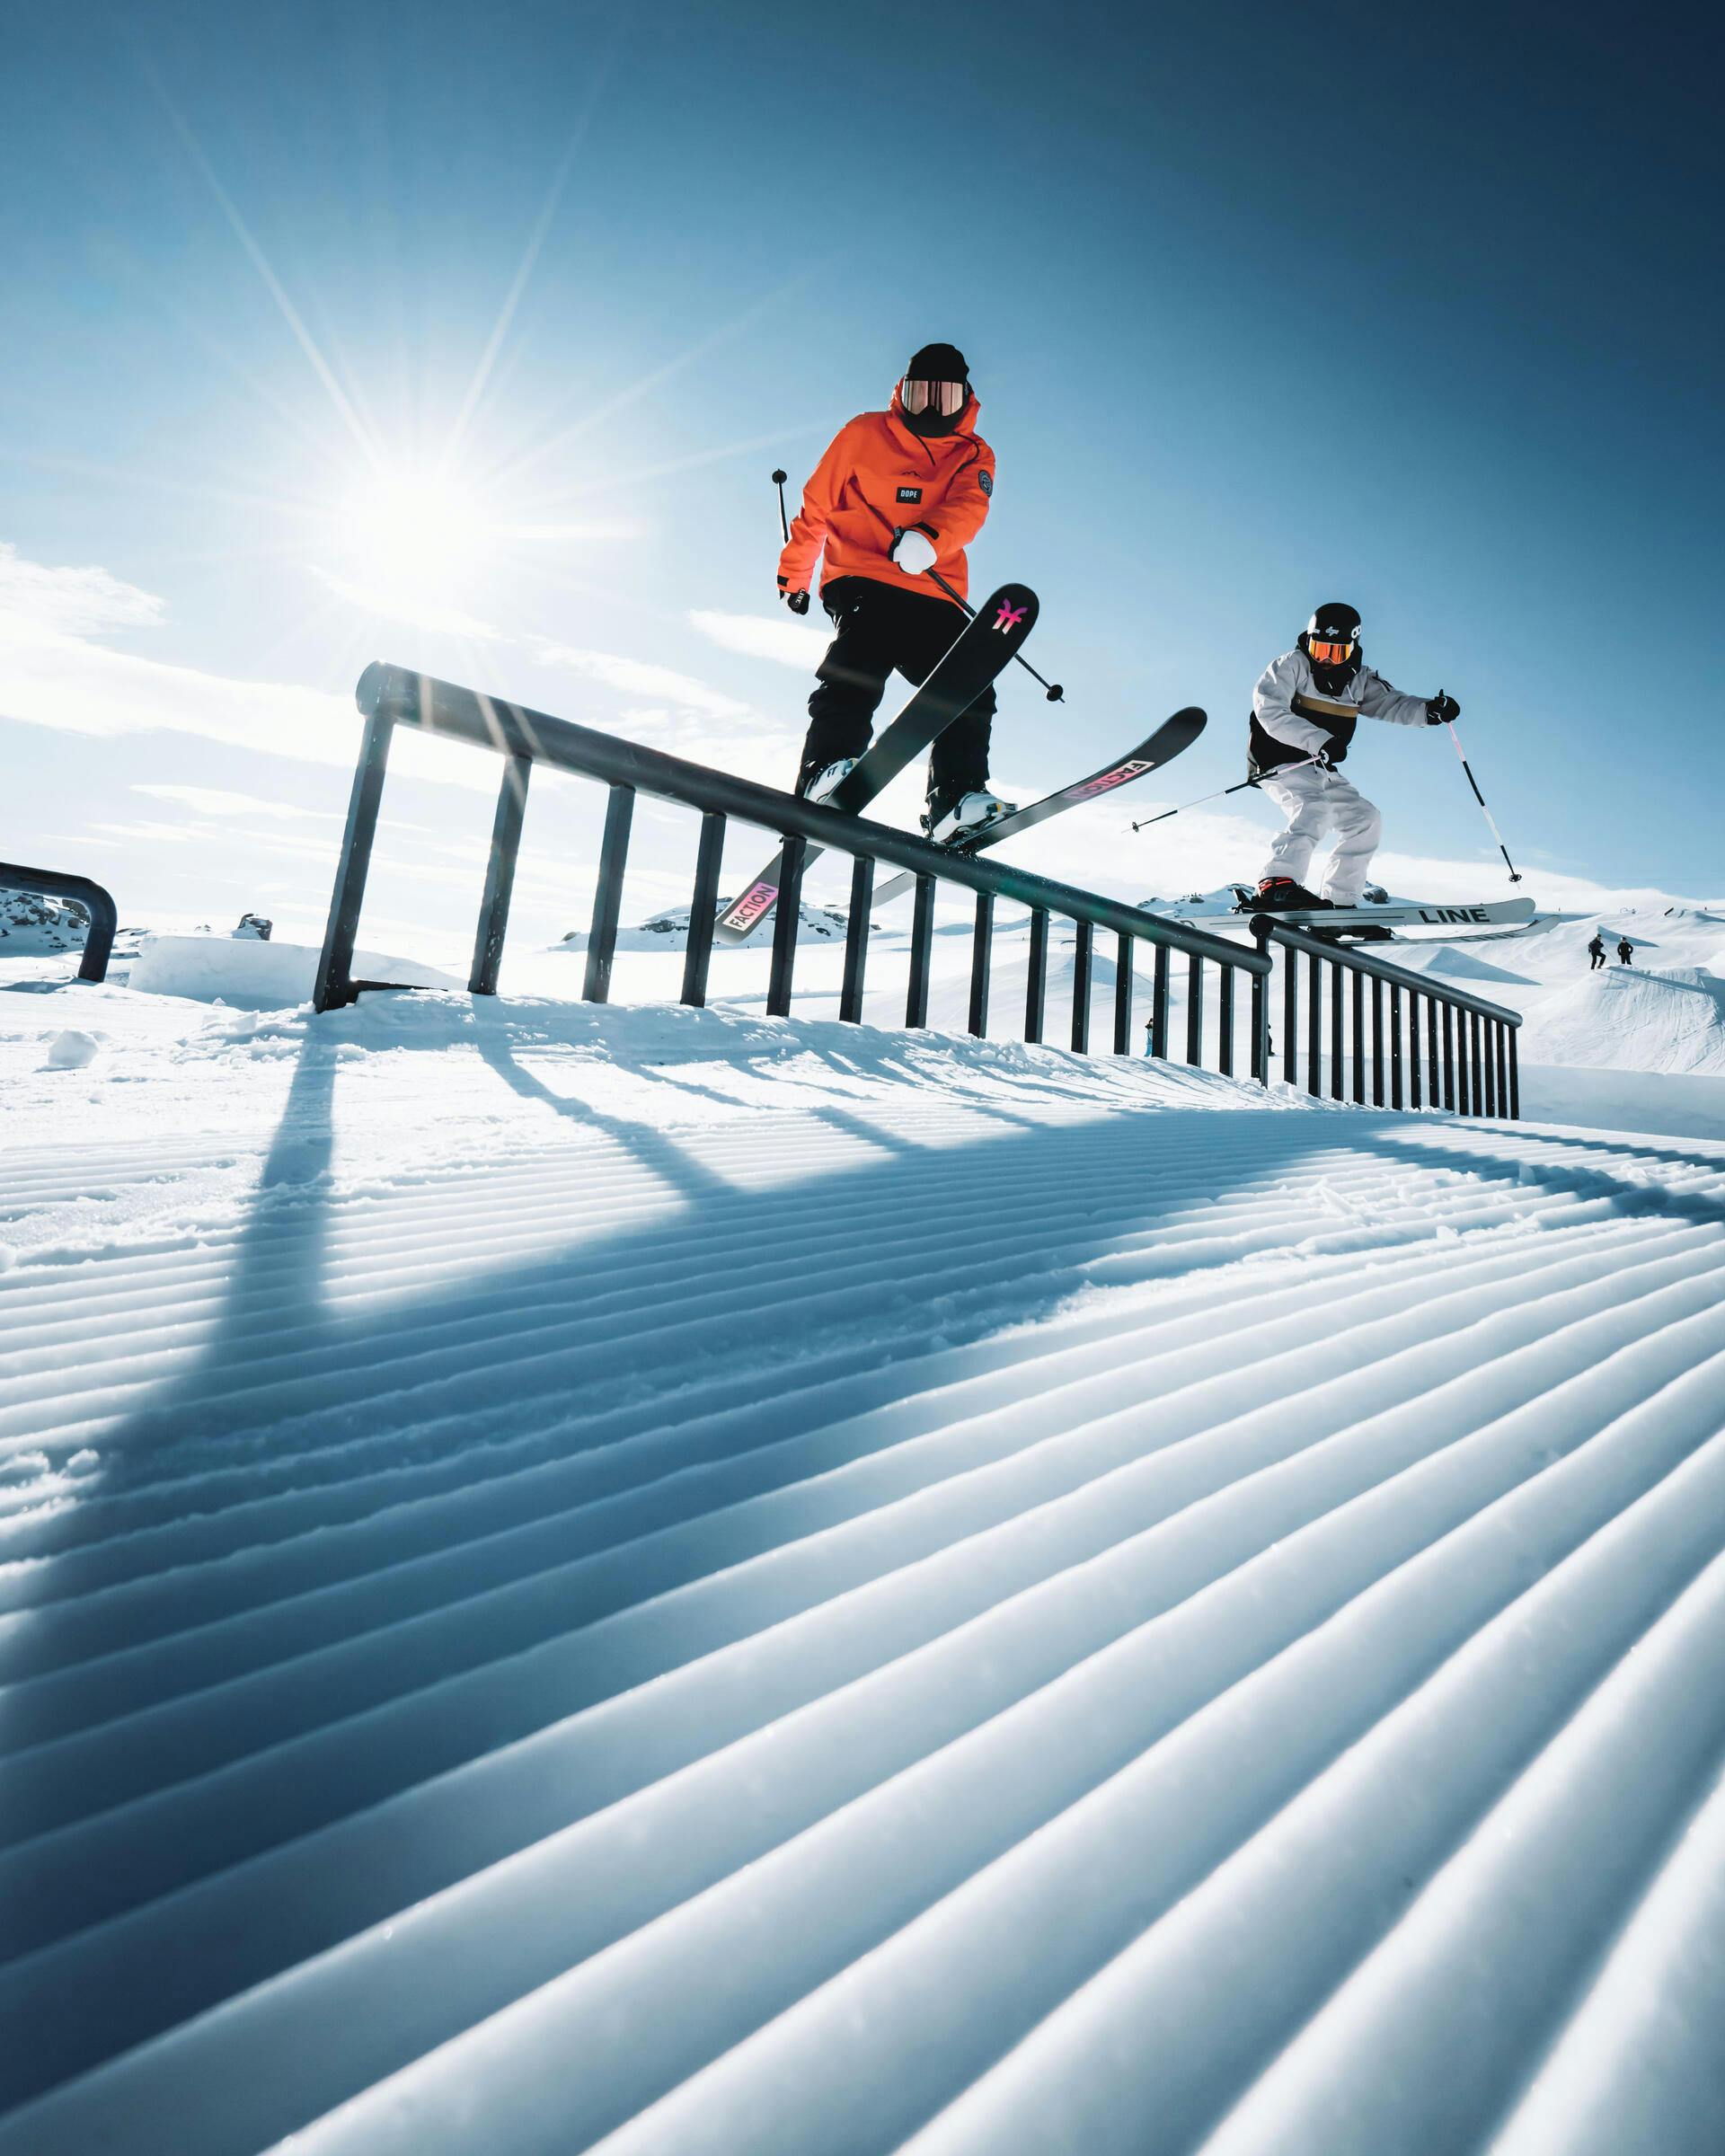 hit boxes and rails on skis image